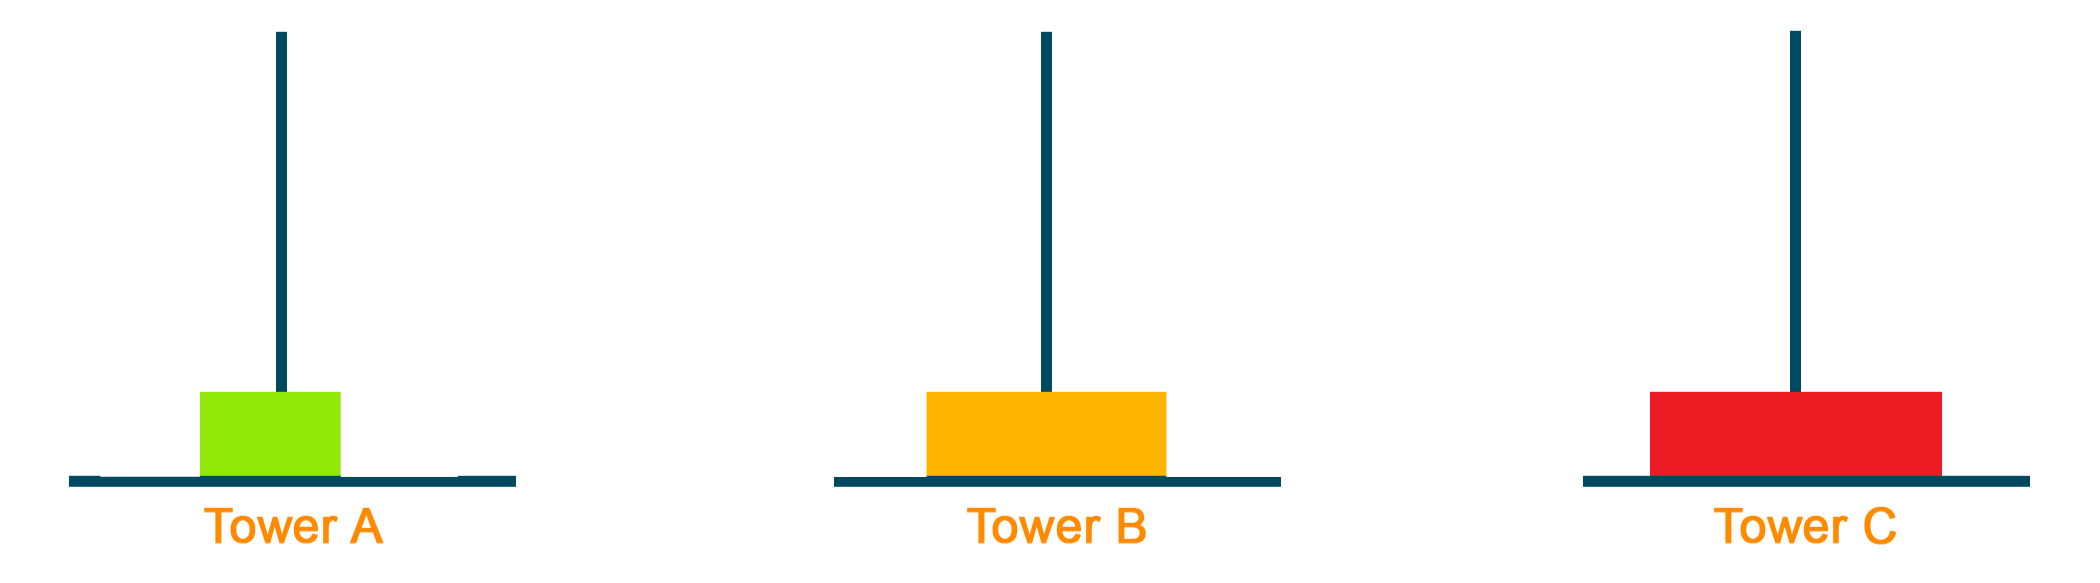 moving the biggest block to Tower C from Tower A